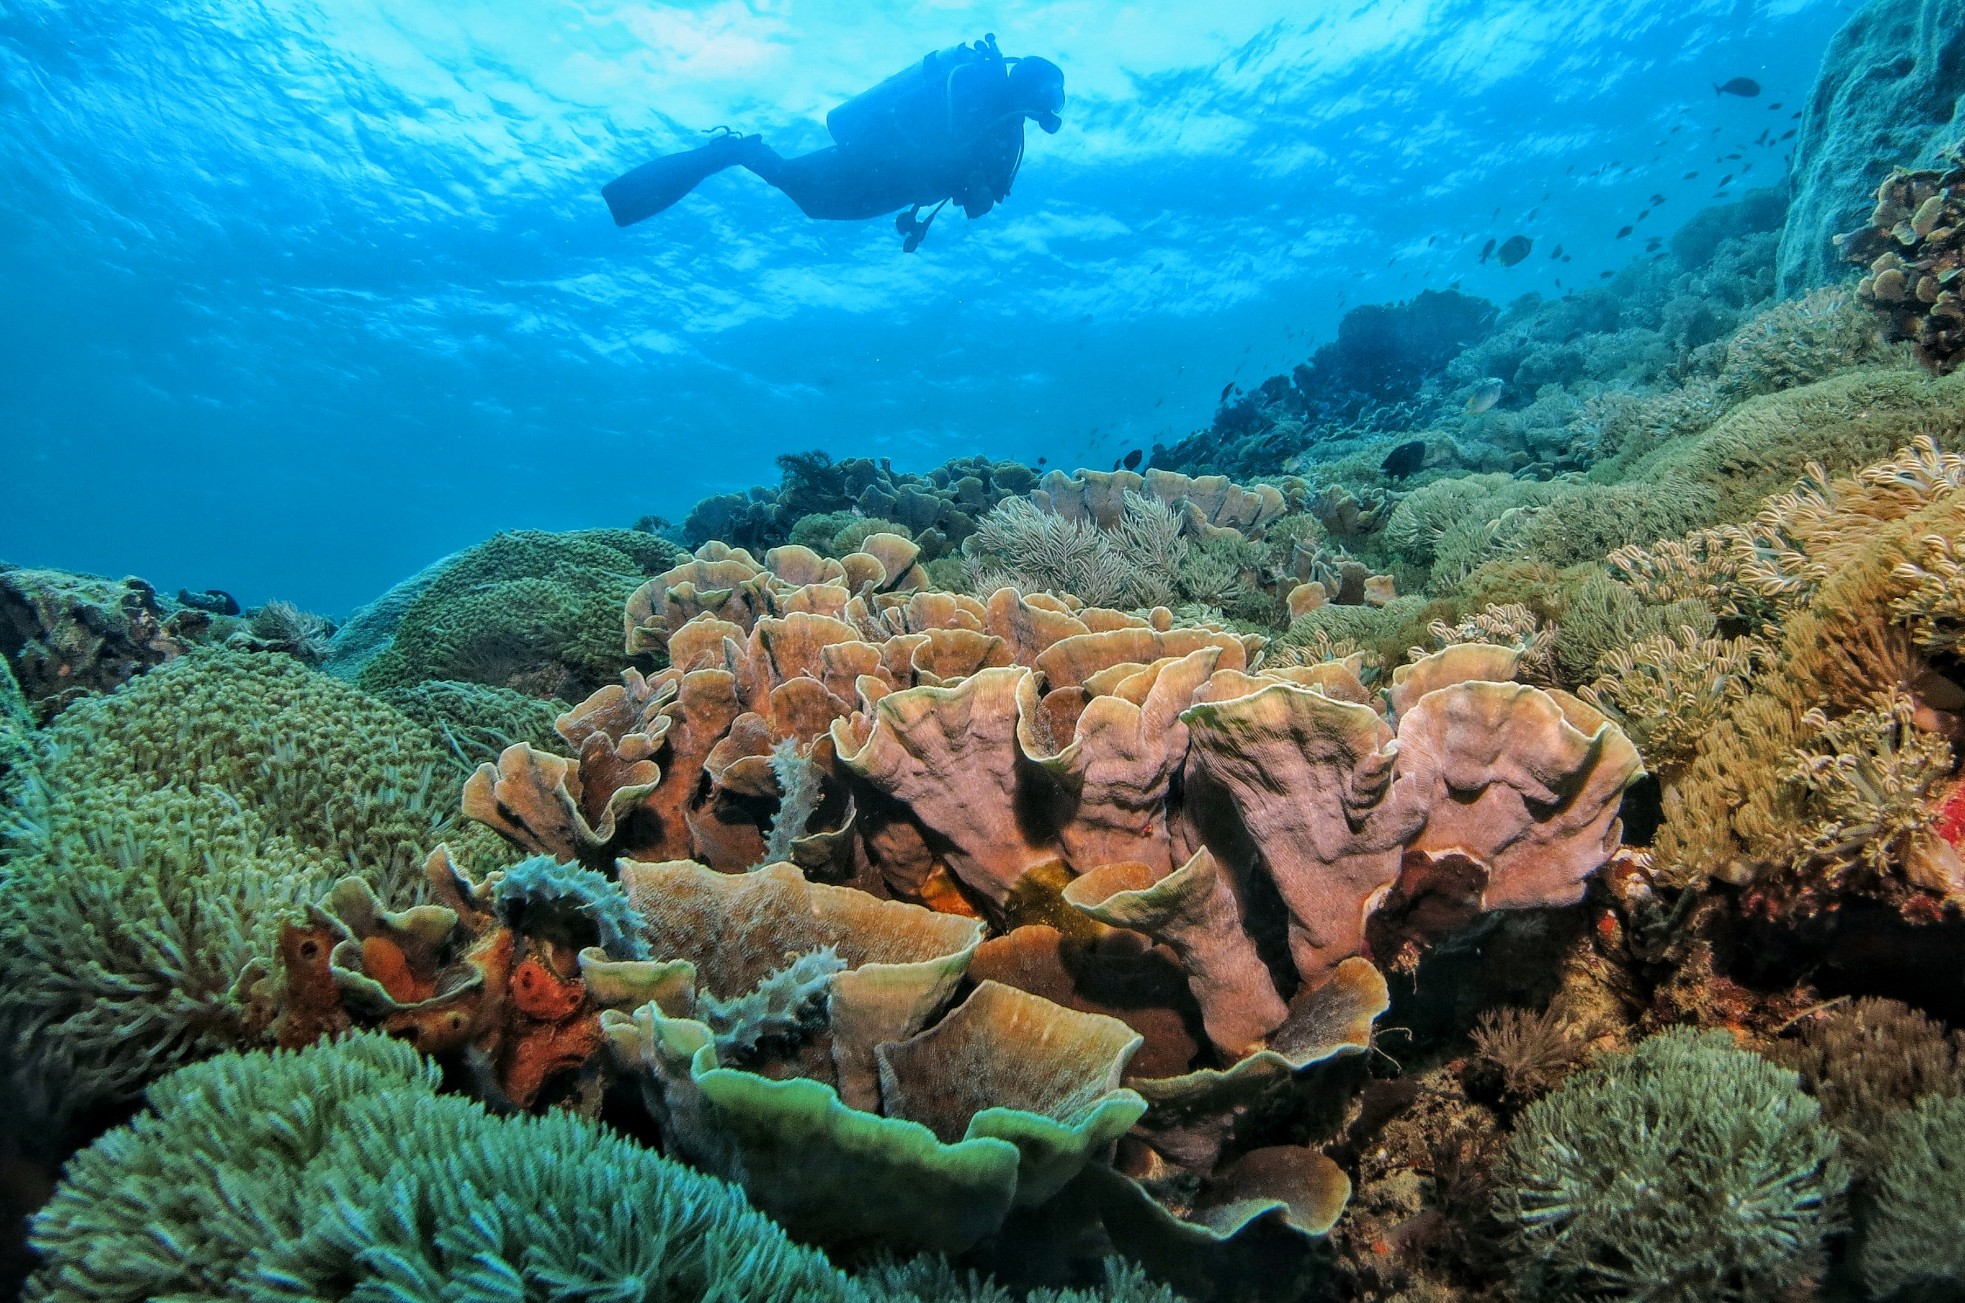 Colourful corals and a diver